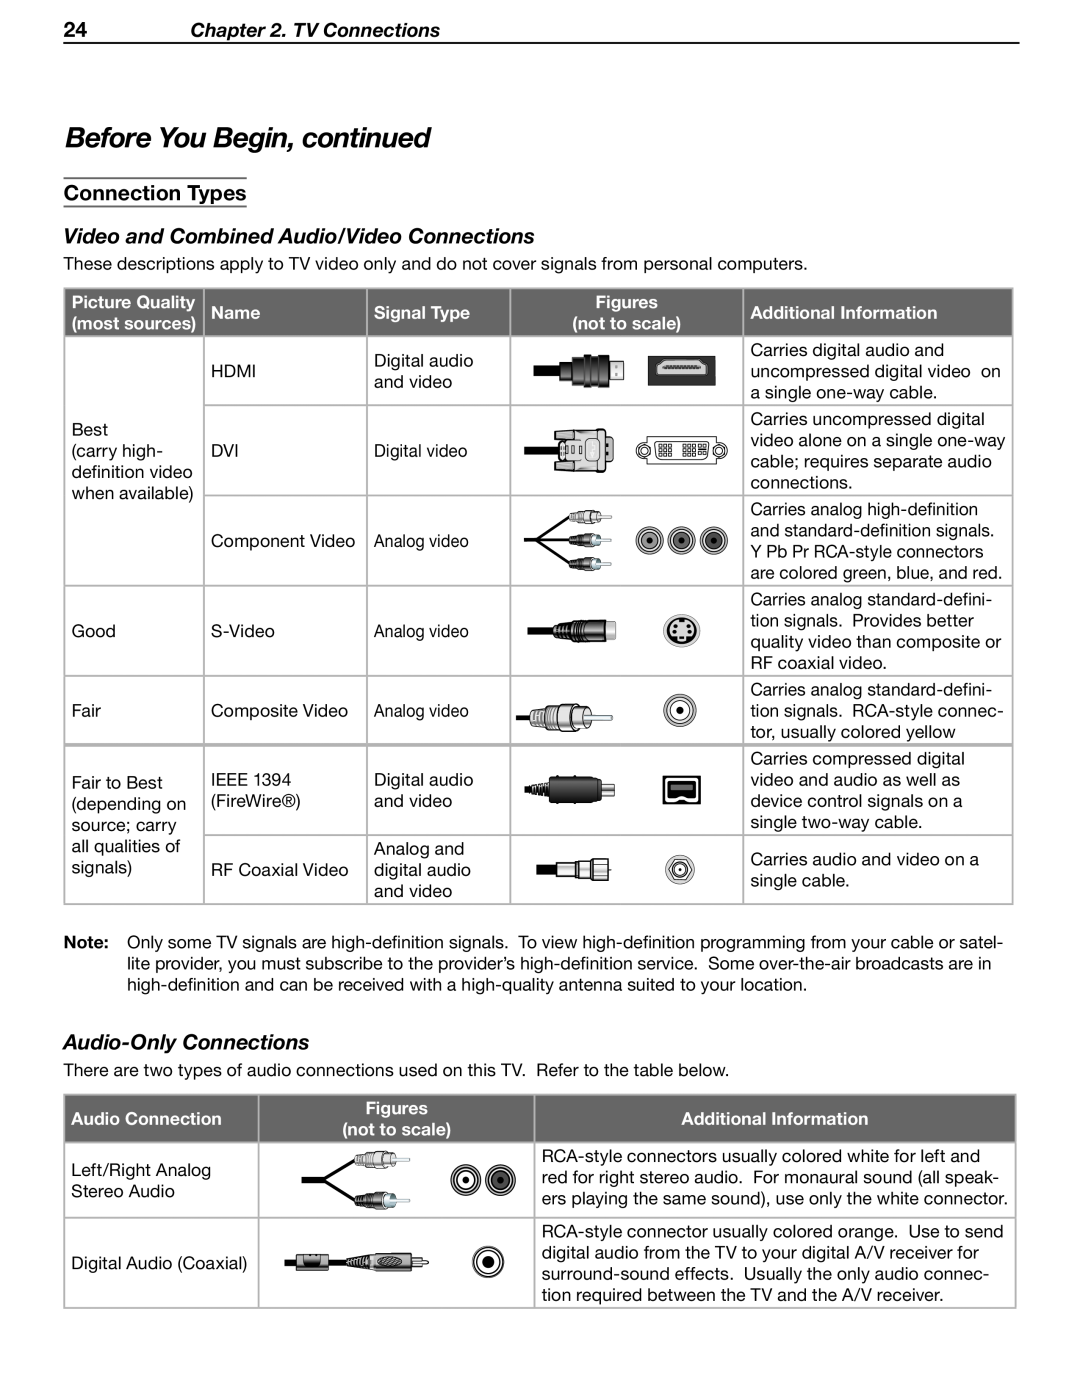 Mitsubishi Electronics LT-37131 manual Connection Types, Video and Combined Audio/Video Connections, Audio-Only Connections 